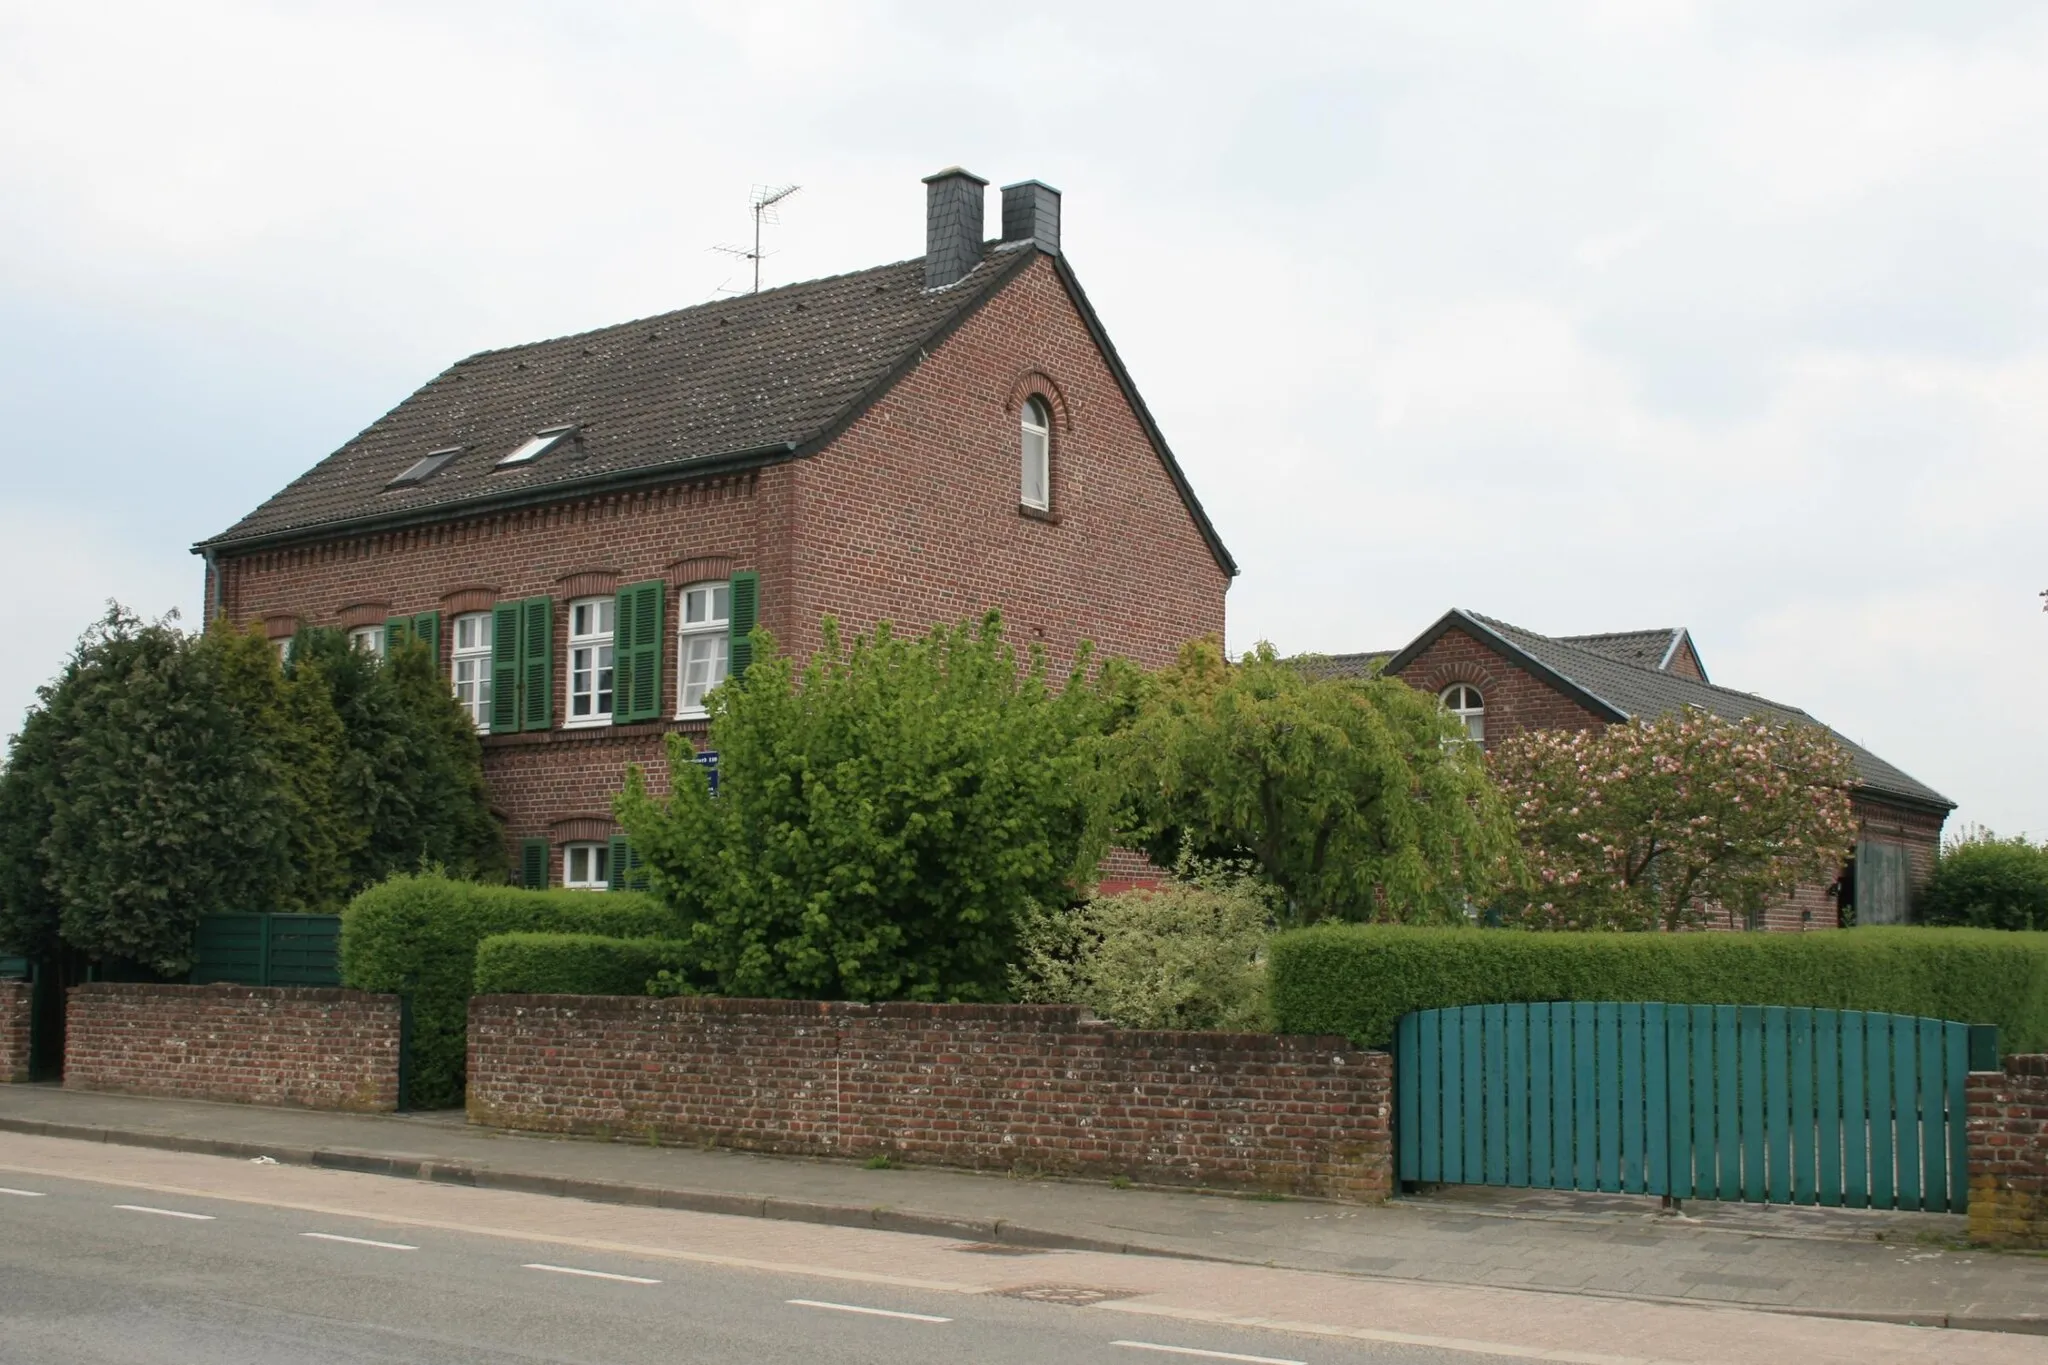 Photo showing: Cultural heritage monument No. W 021 in Mönchengladbach